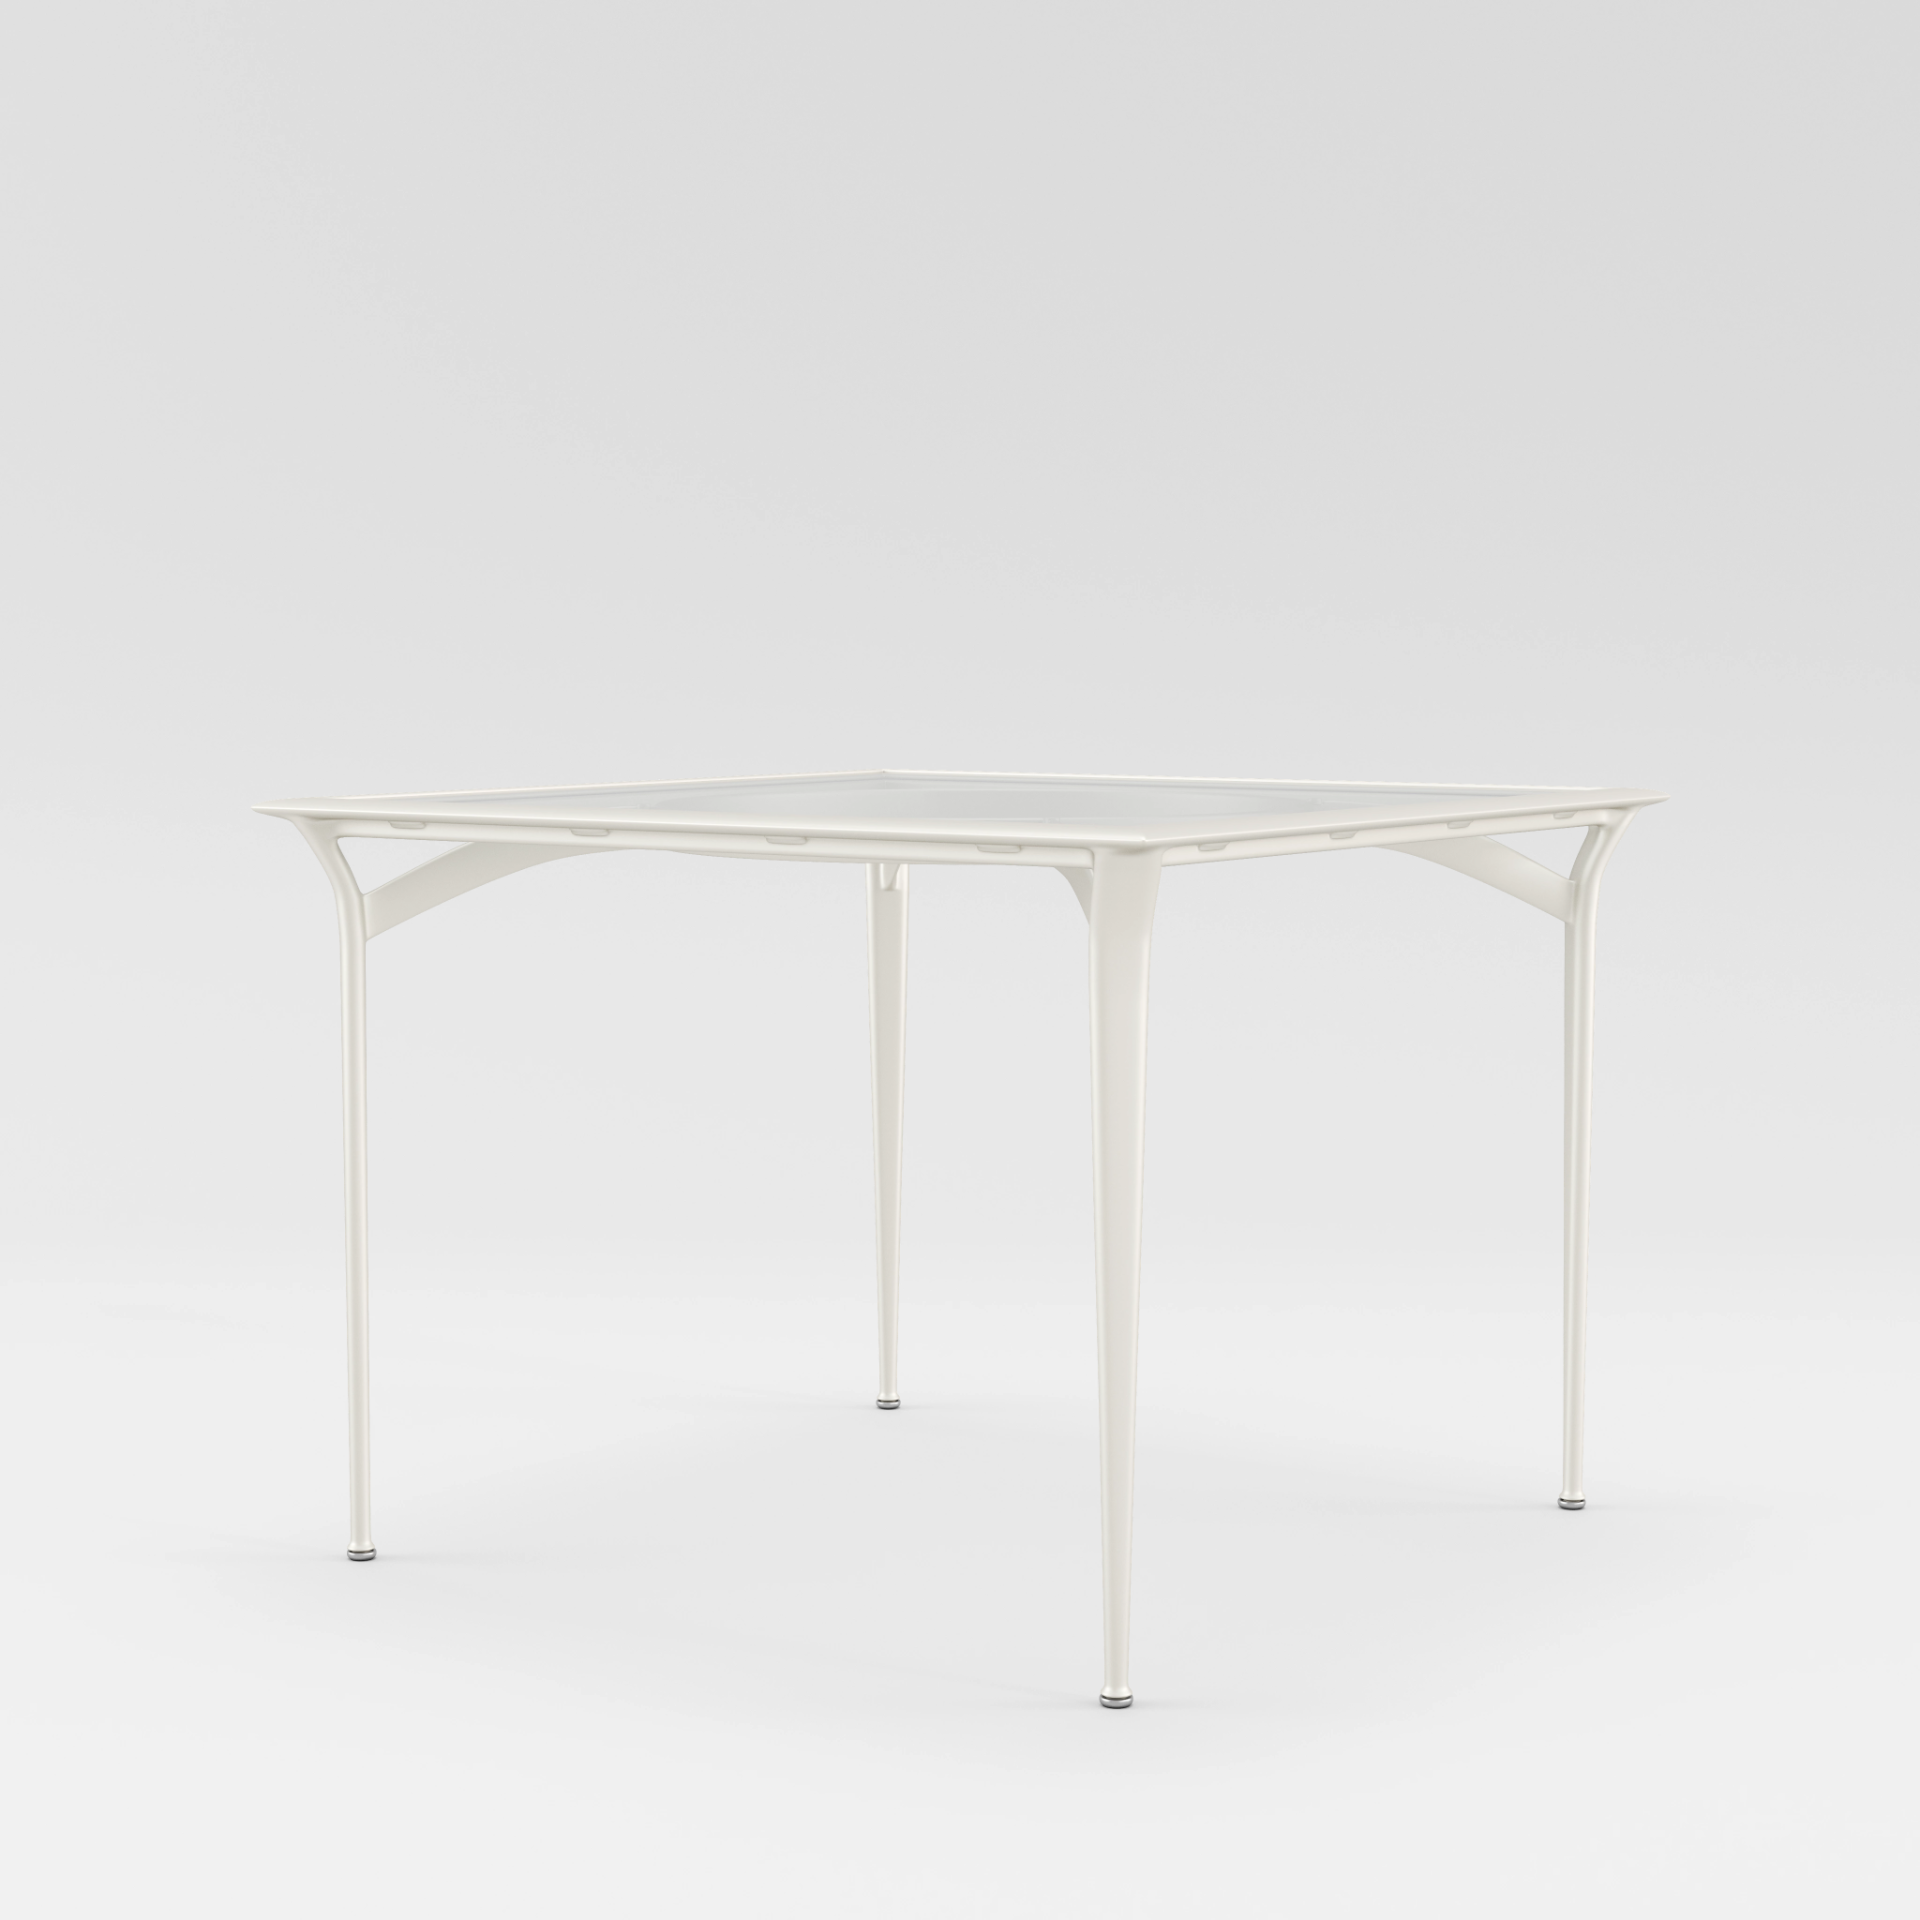 Flight 36" Square Bistro Dining Table by Brown Jordan